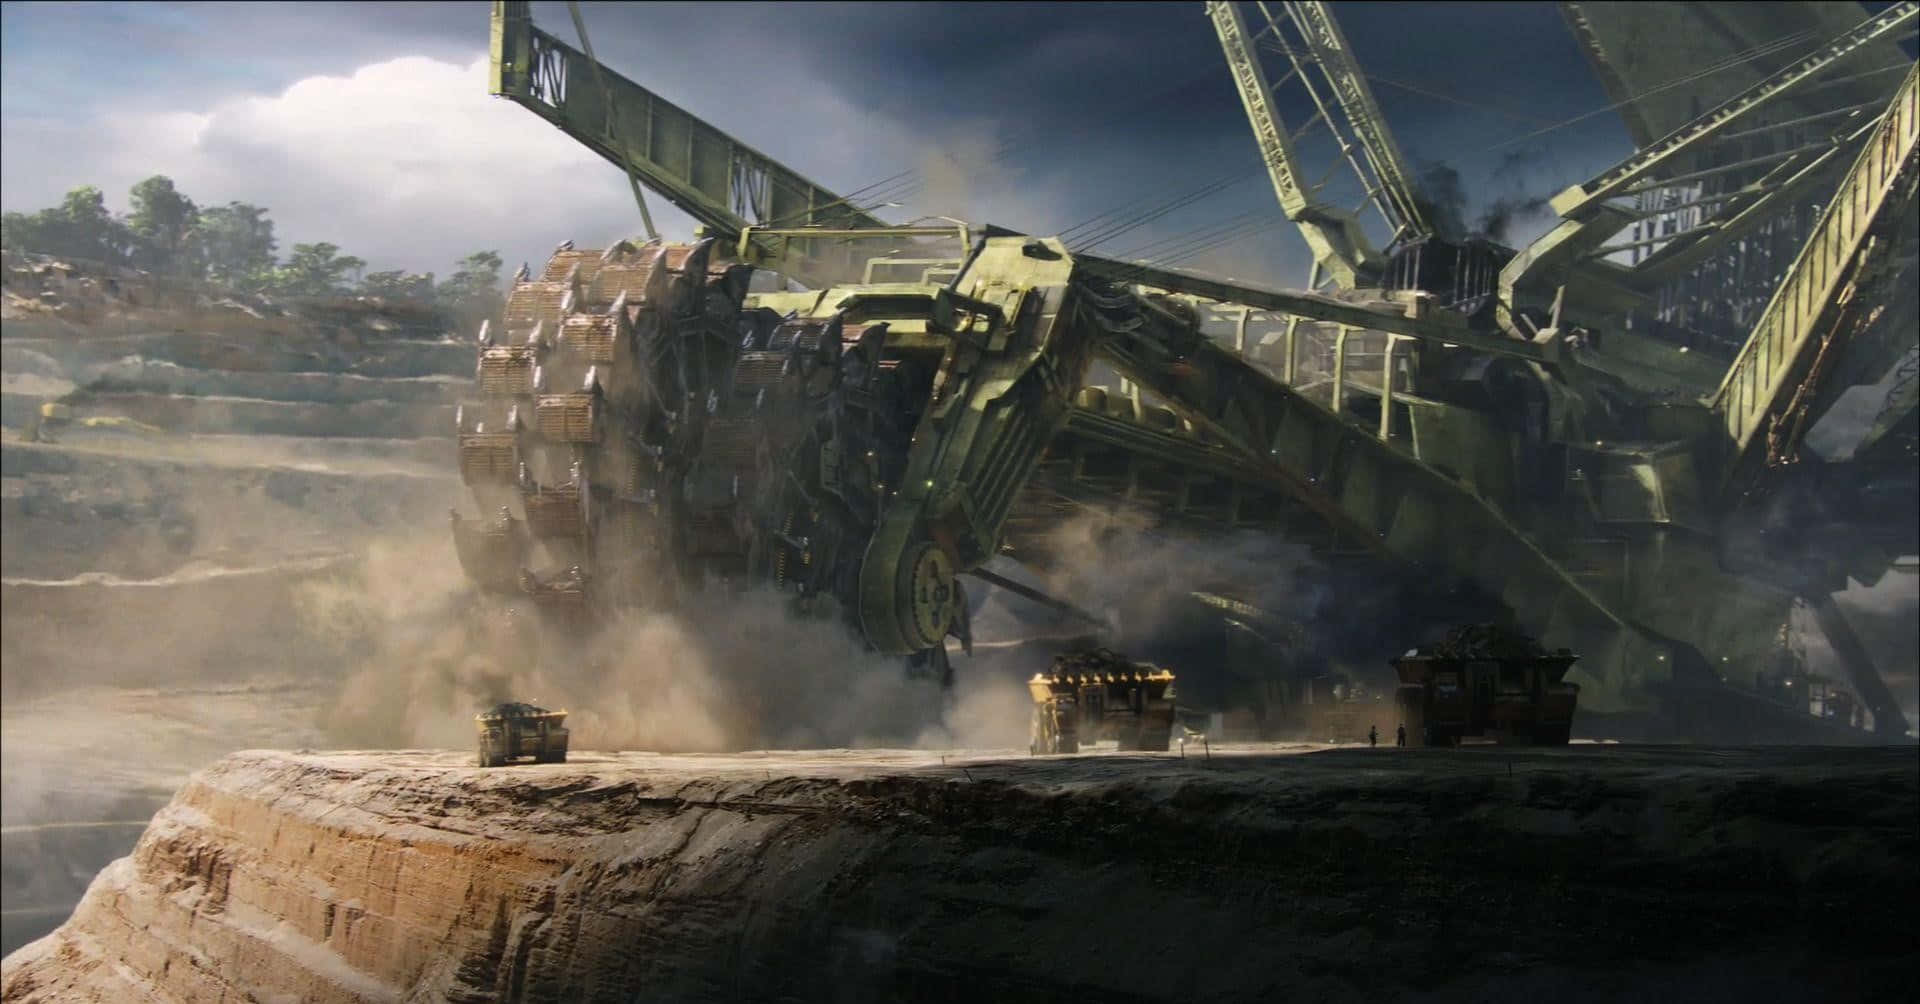 A Large Machine Is In The Middle Of A Dirt Field